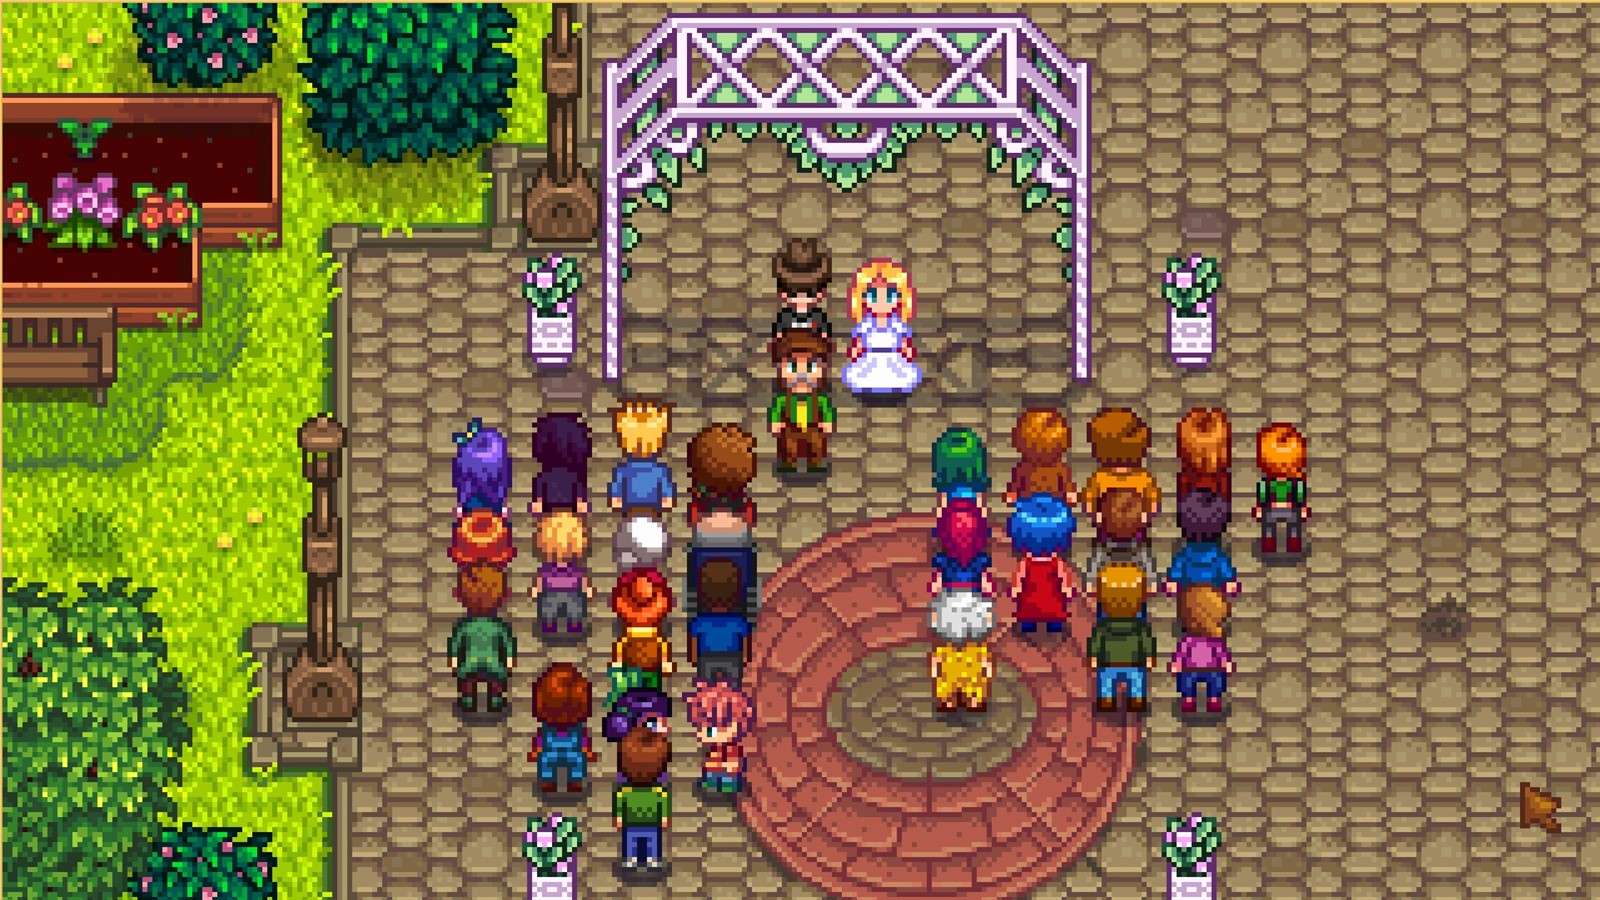 An image of players getting married in Stardew Valley.